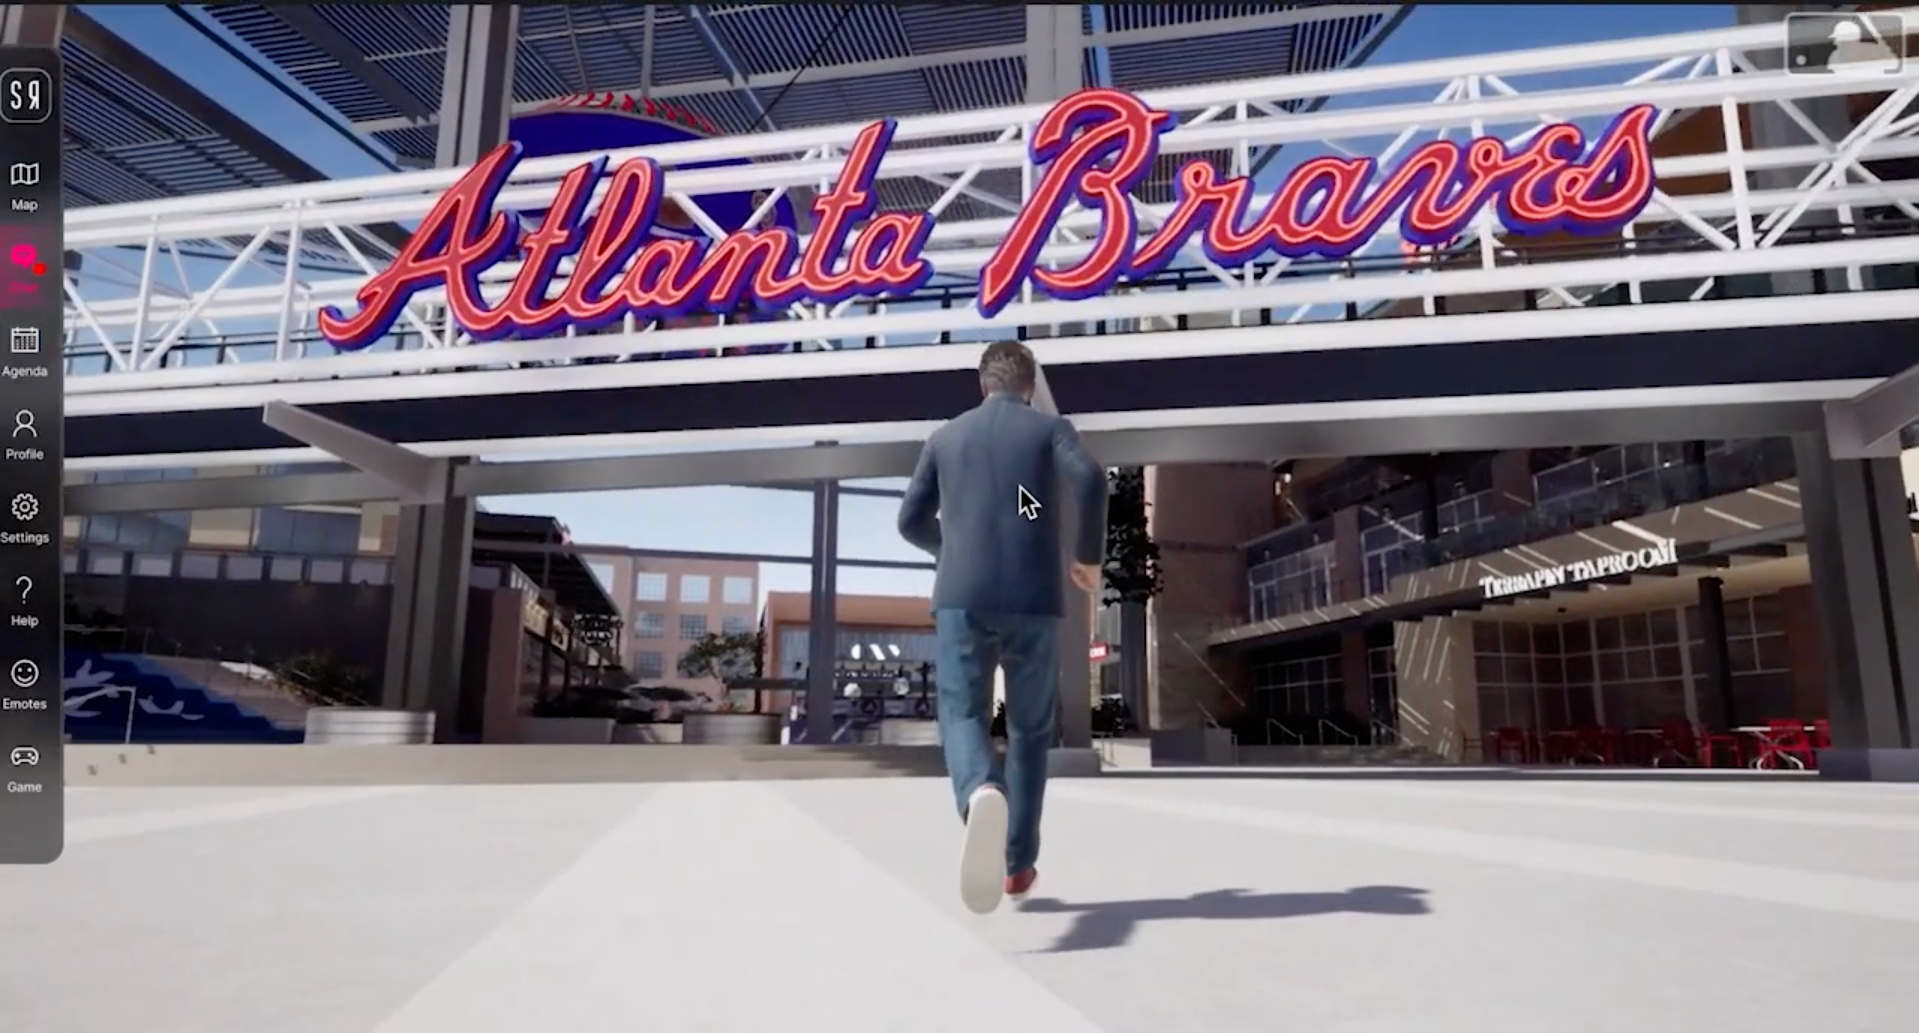 Atlanta Braves Embrace the Metaverse With Creation of Digital Truist Park